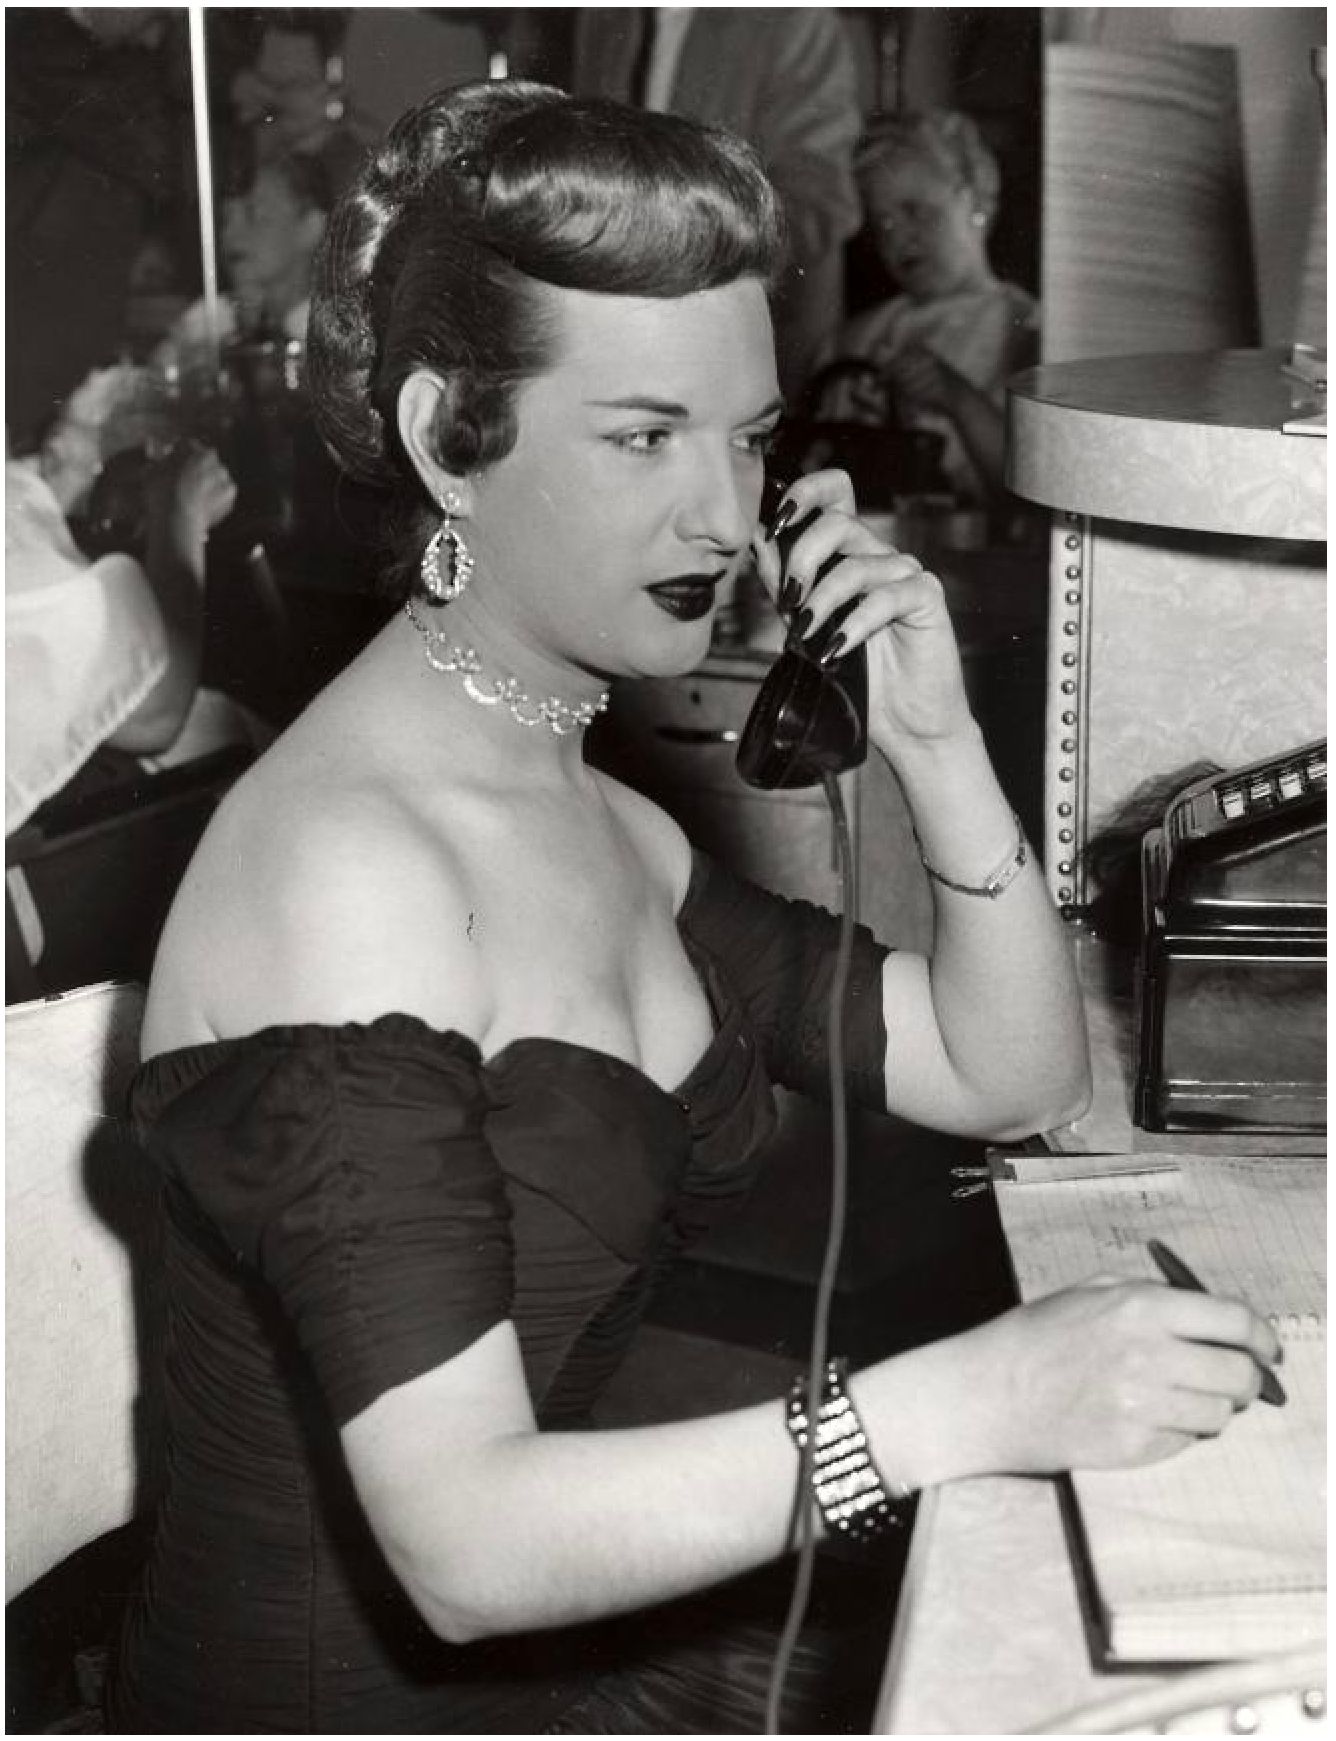 Charlotte McLeod working as a receptionist.